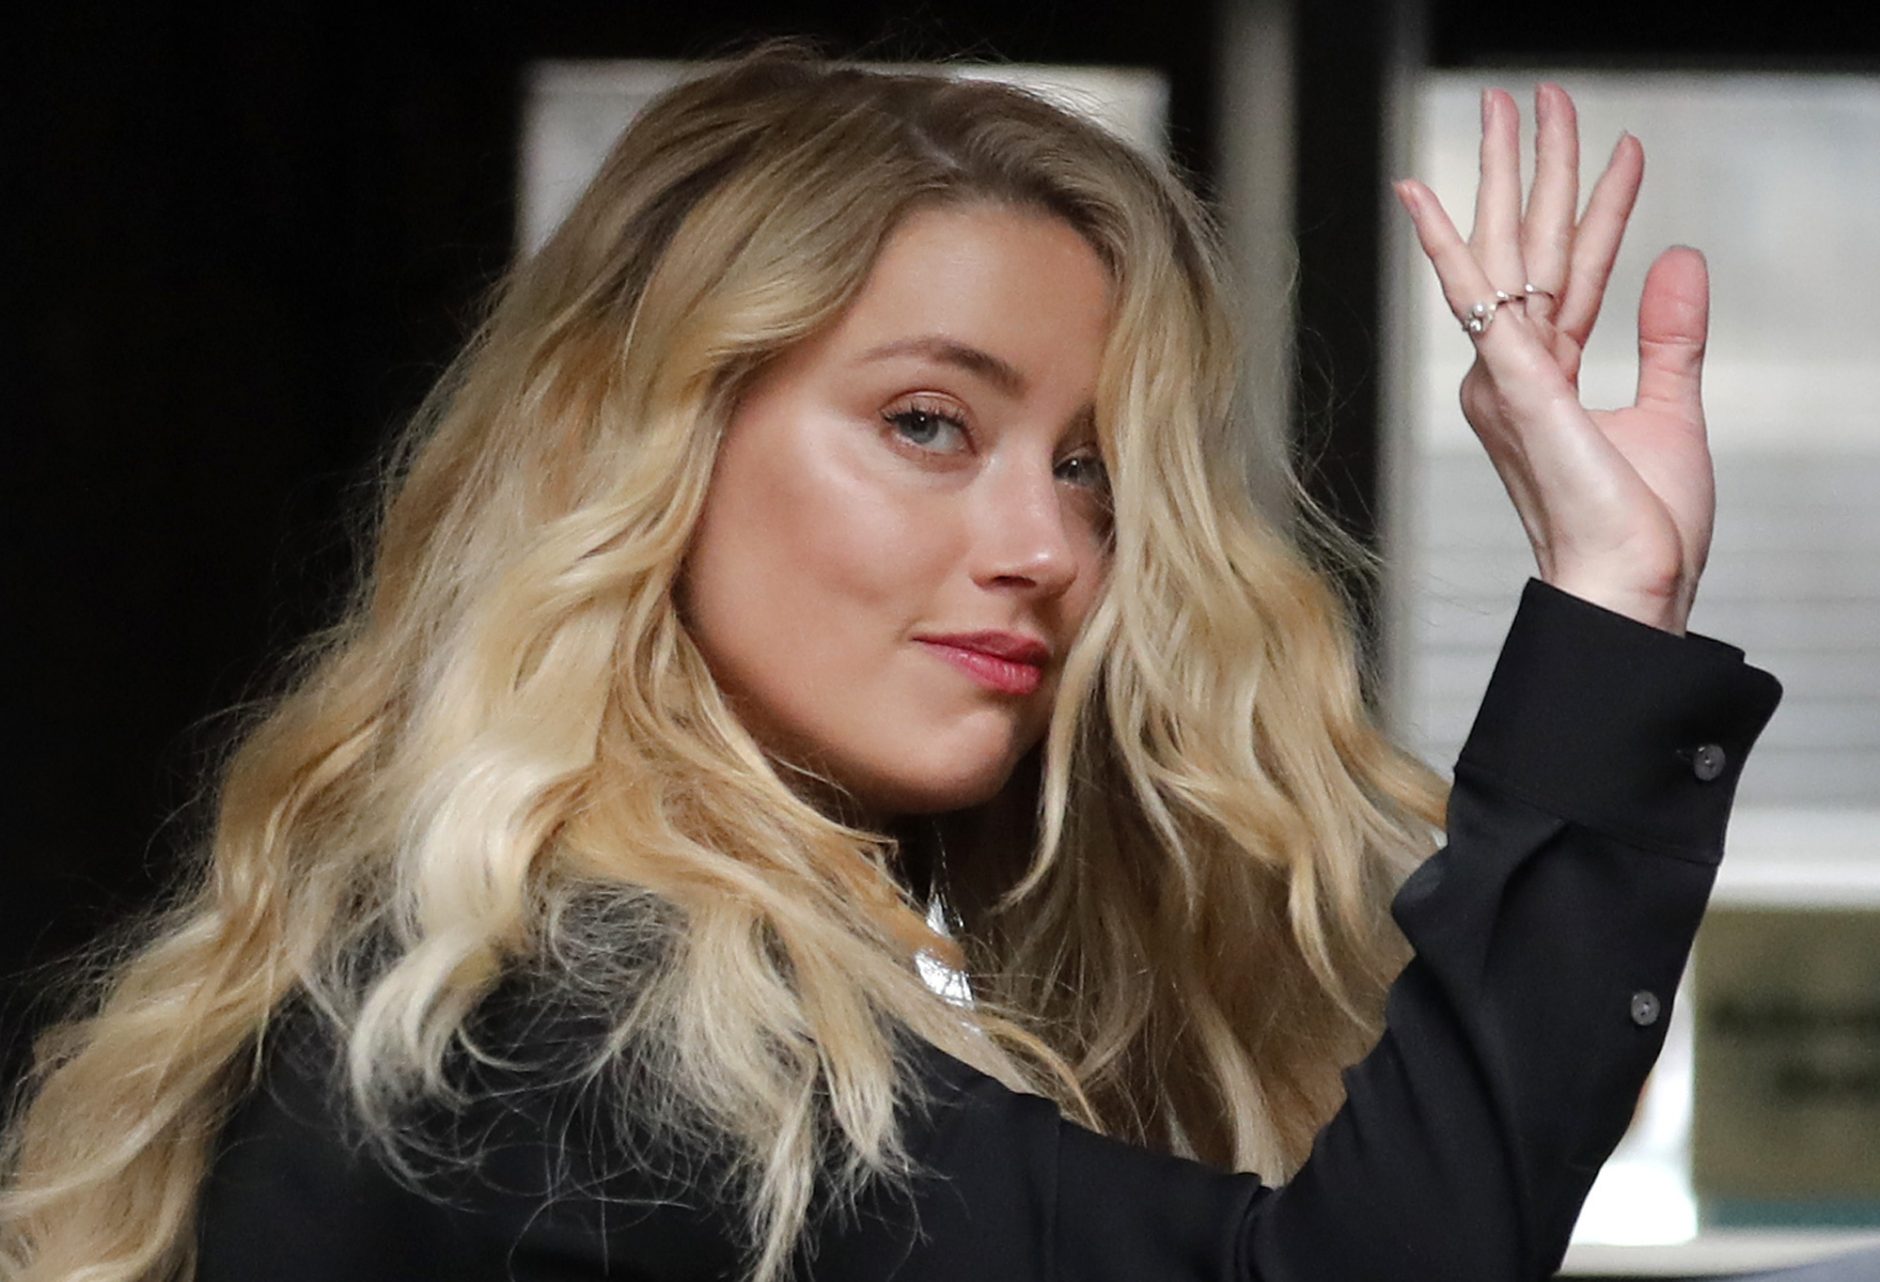 Virginia judge denies Amber Heard's attempt to toss Johnny Depp's defamation case | Courthouse News Service